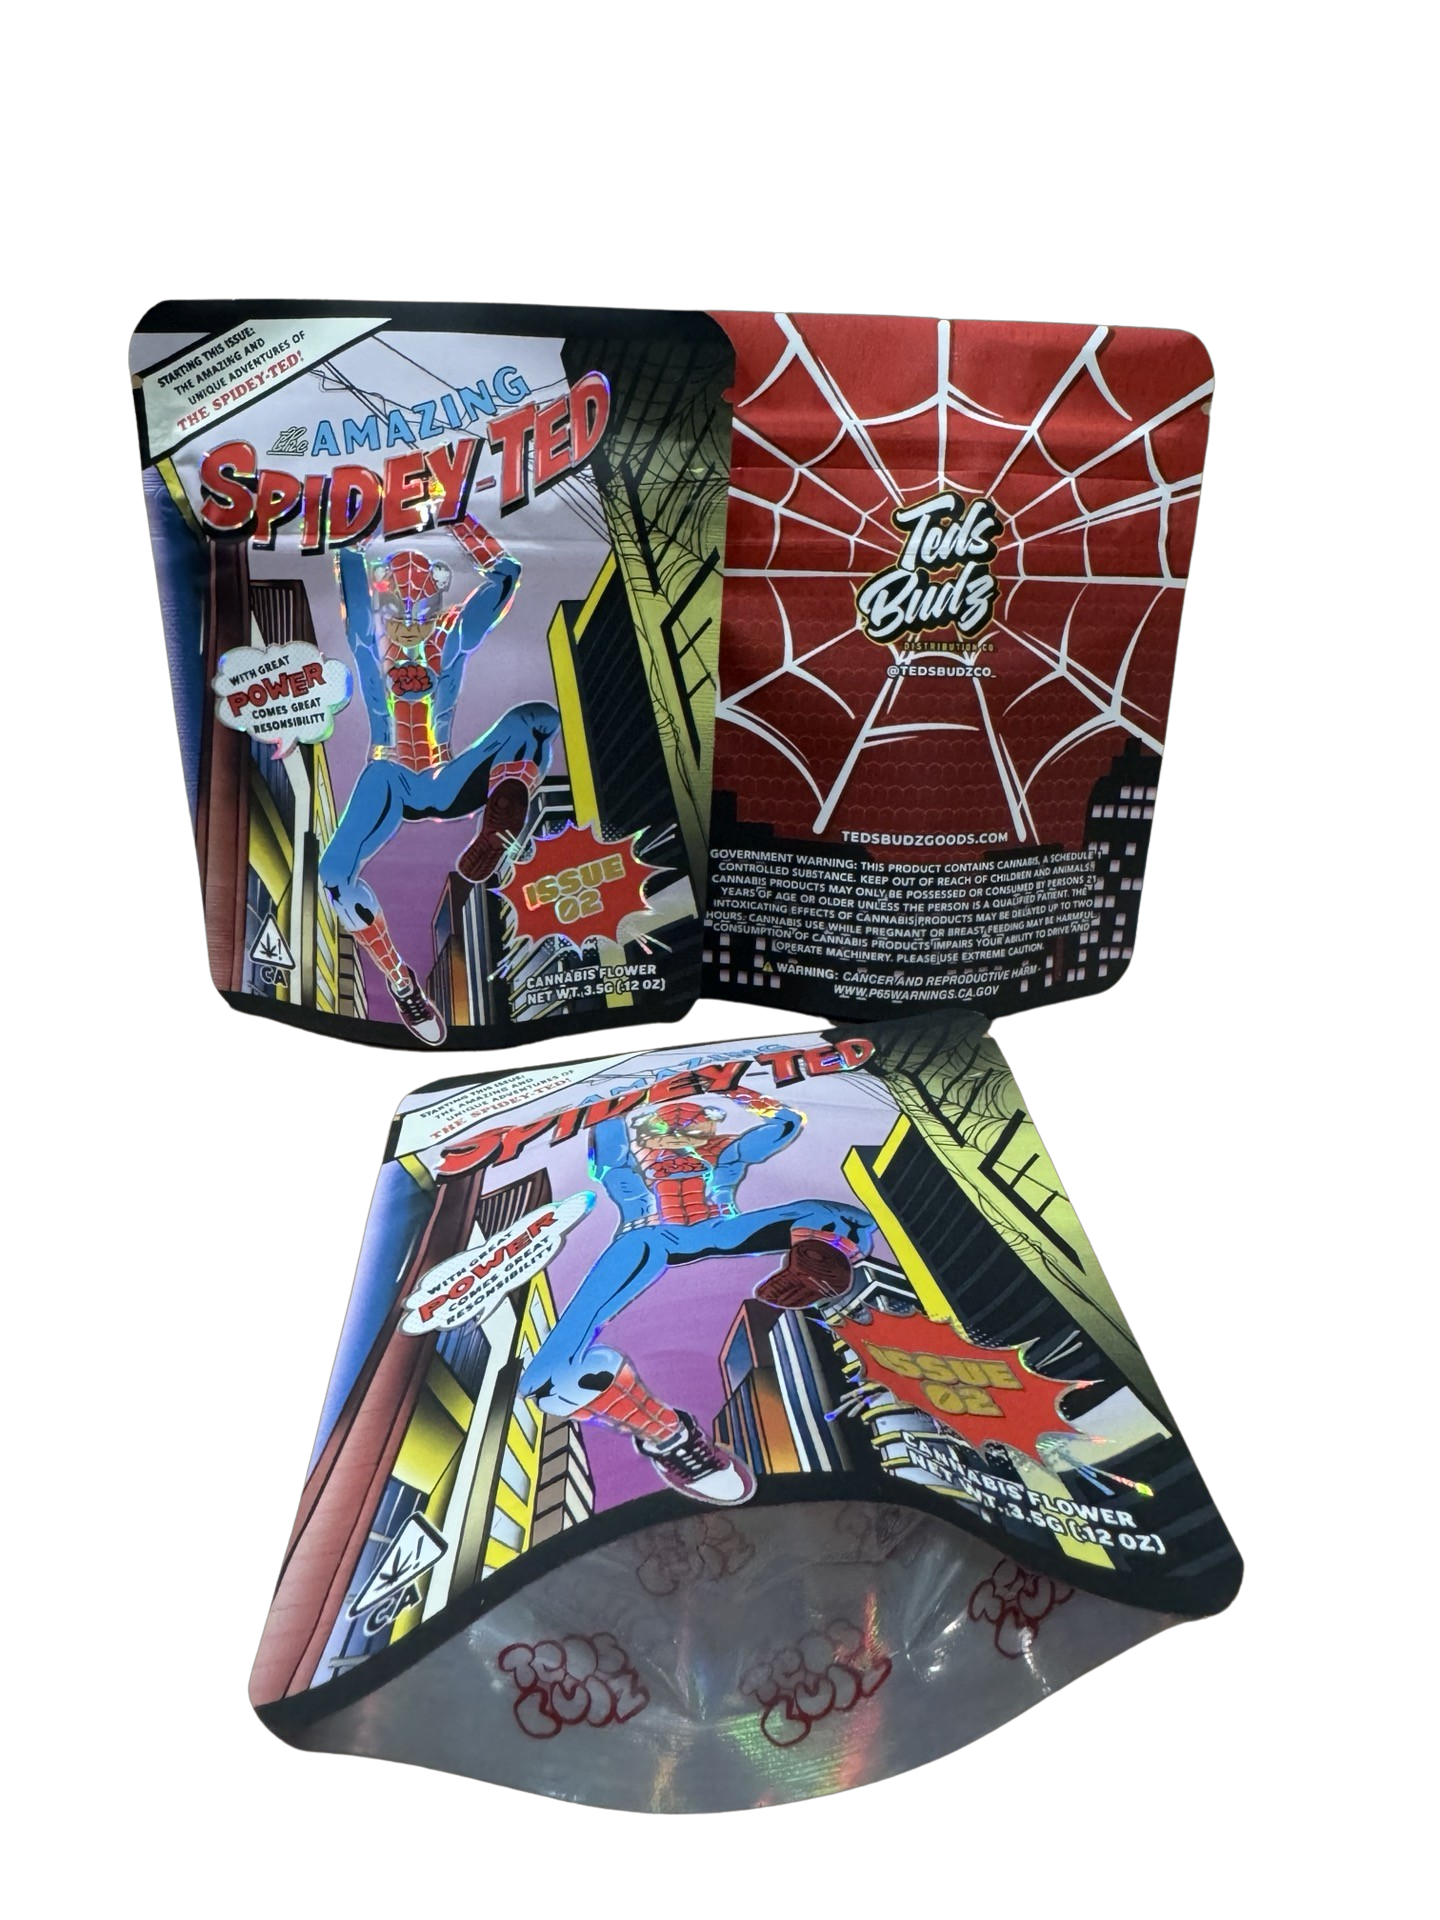 The Amazing Spidey-TED Issue 2 Mylar Bags 3.5g Teds Budz